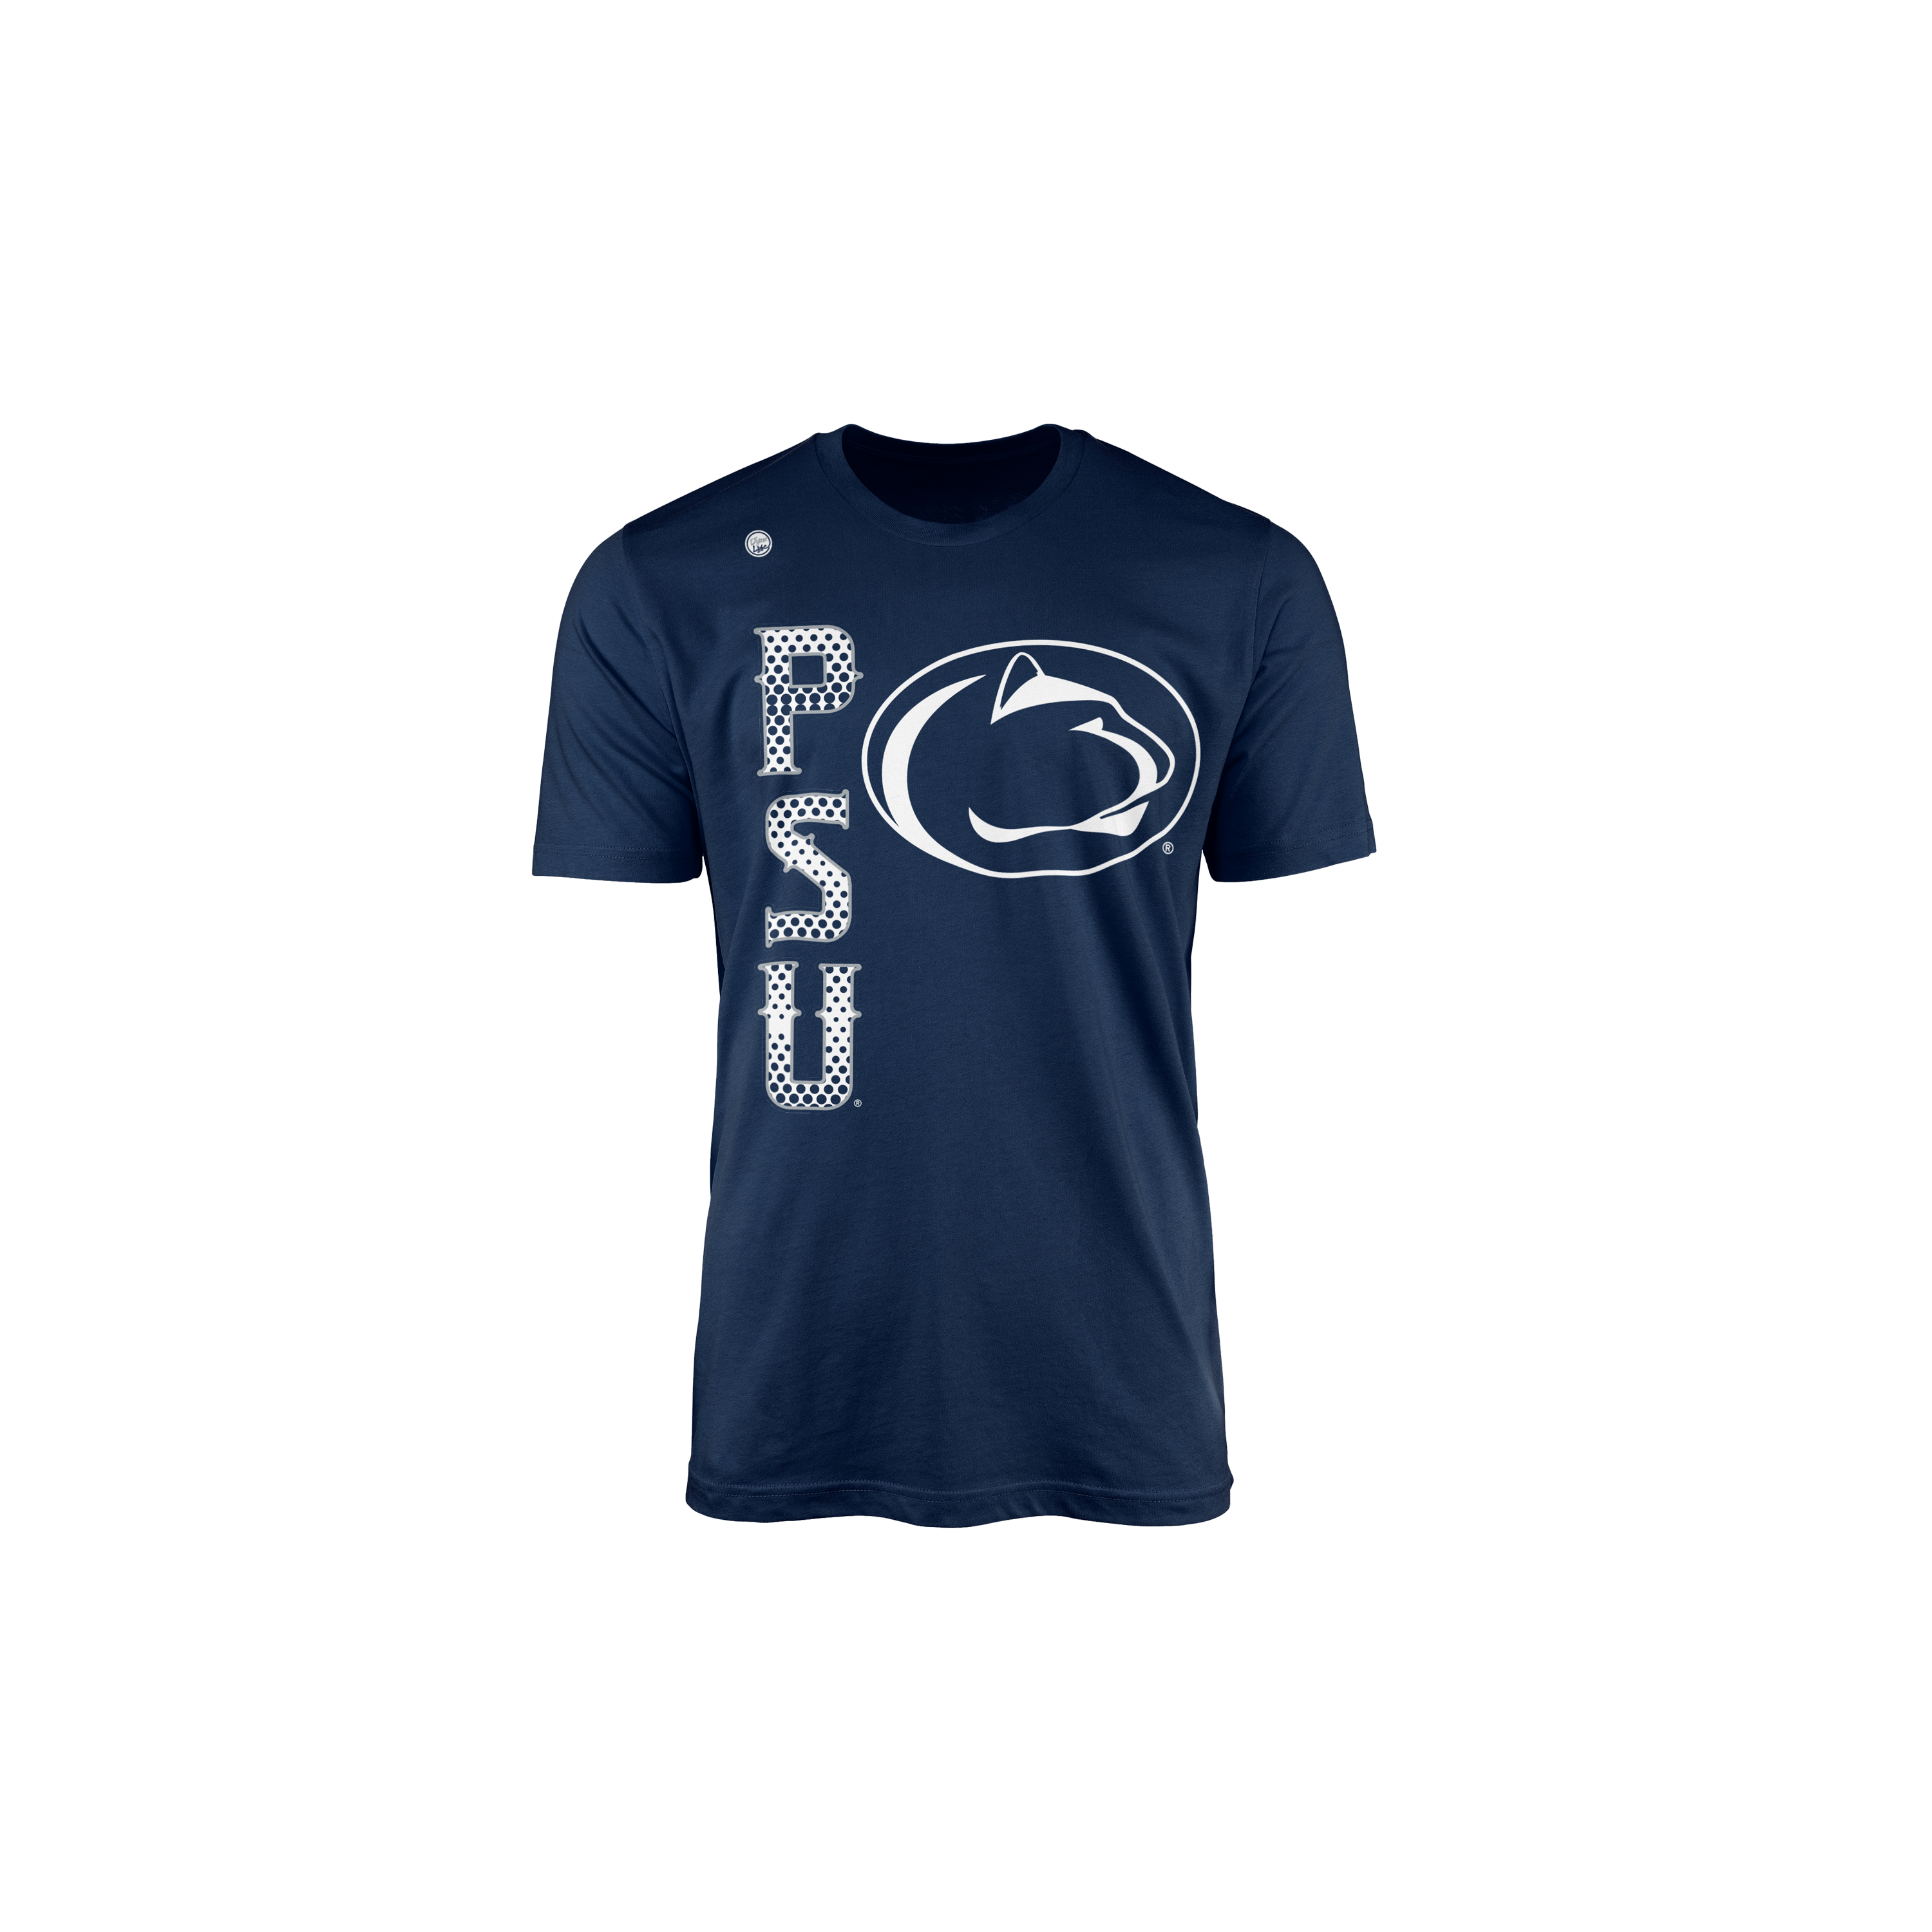 Penn State Nittany Lions Youth Ace Tee